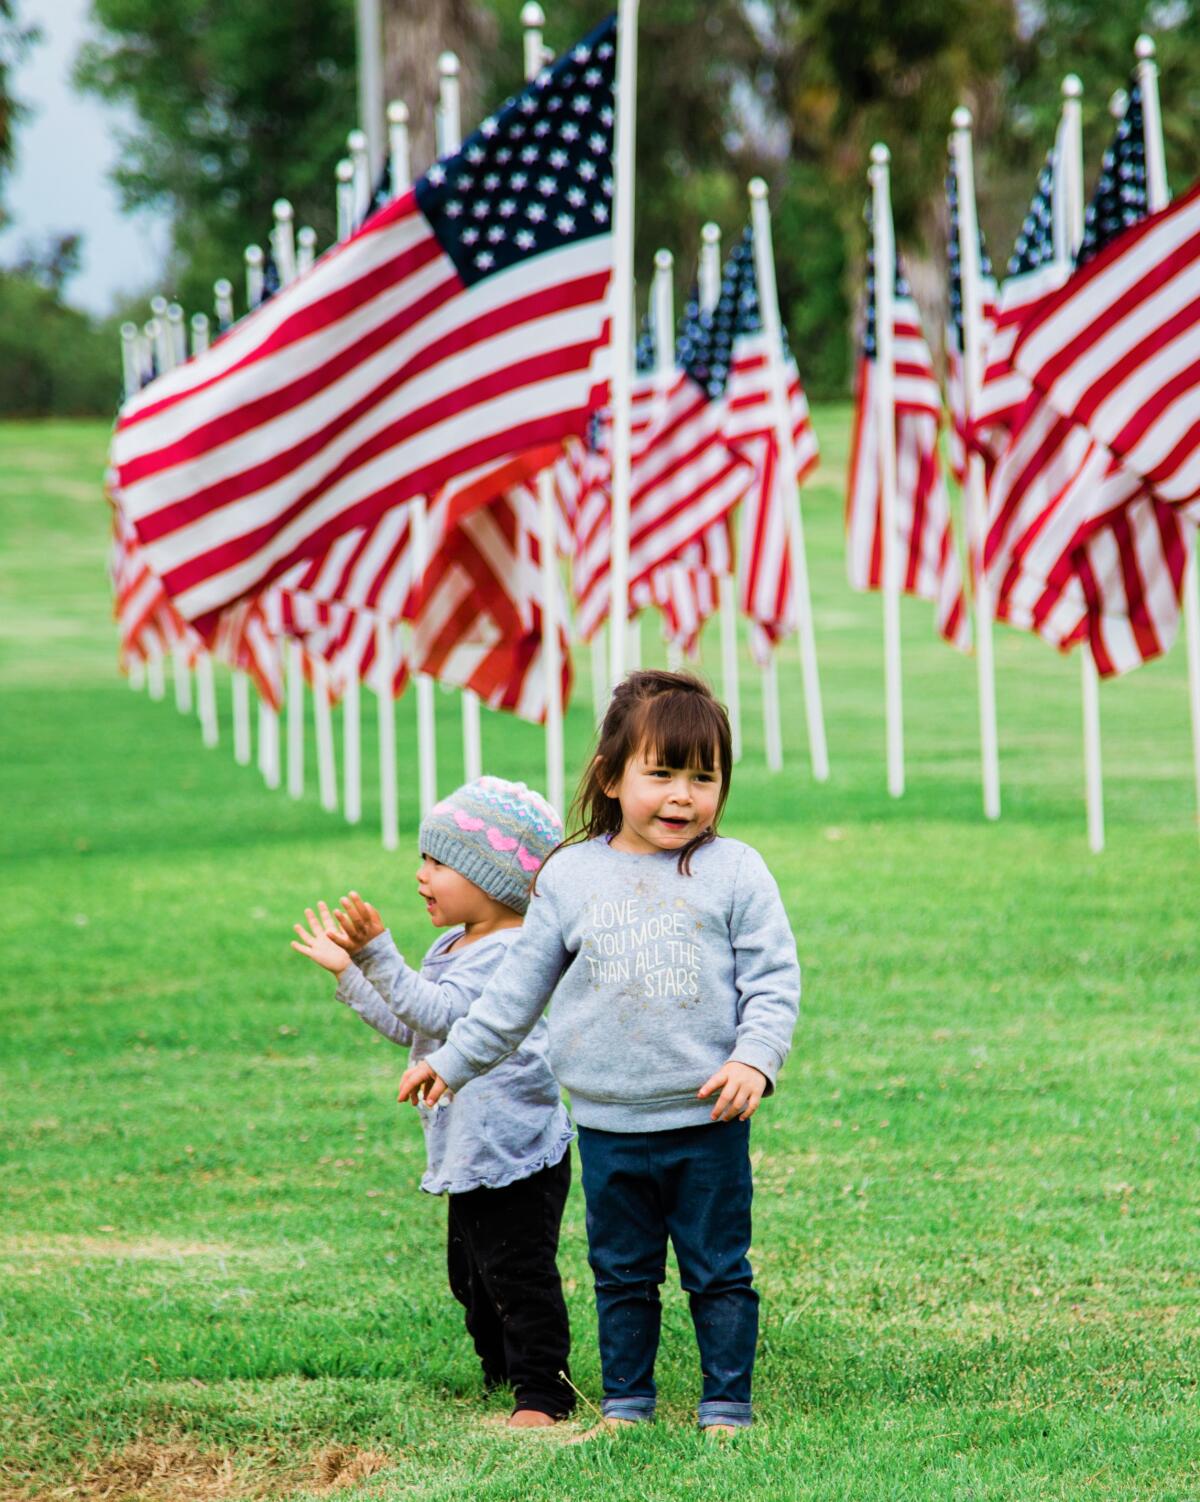 Children Wednesday play in a field of flags during a Flag Day celebration in Irvine's Mason Park.